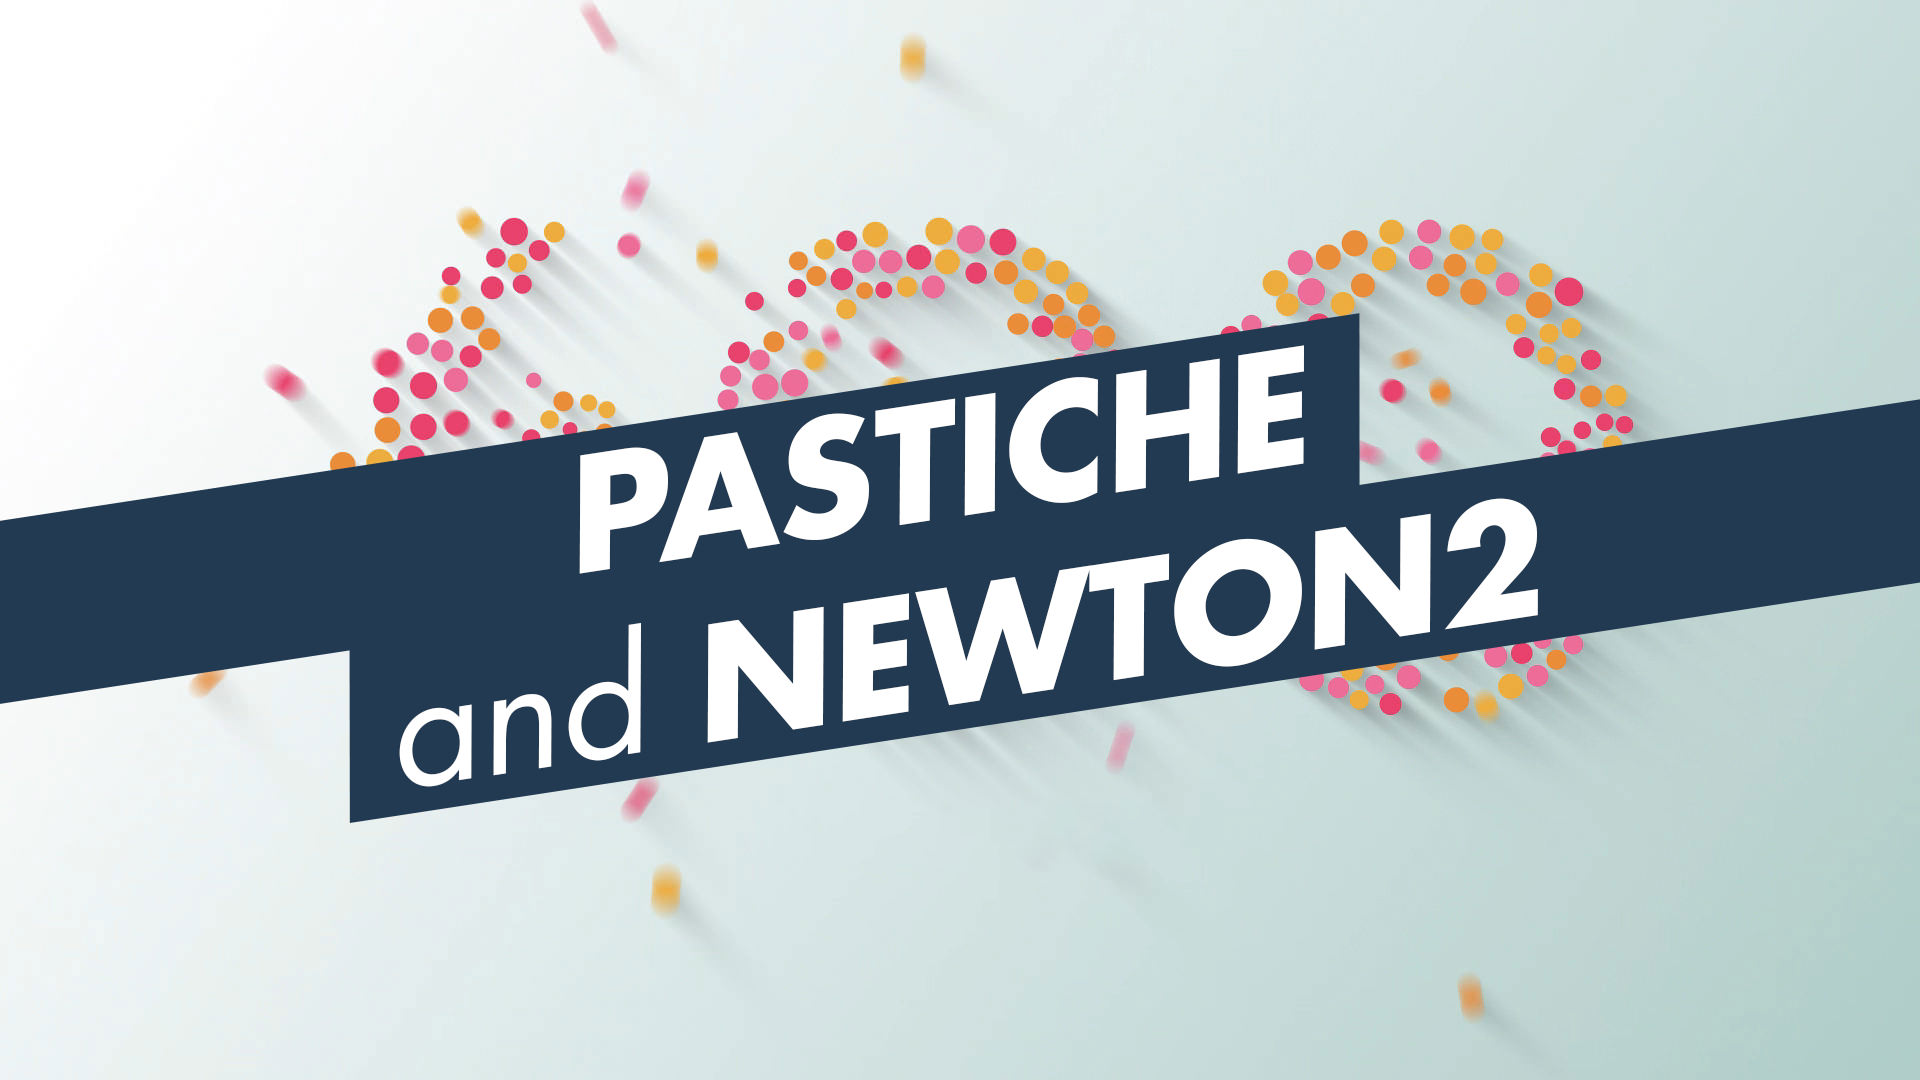 Create a dynamic explainer video using Pastiche and Newton2